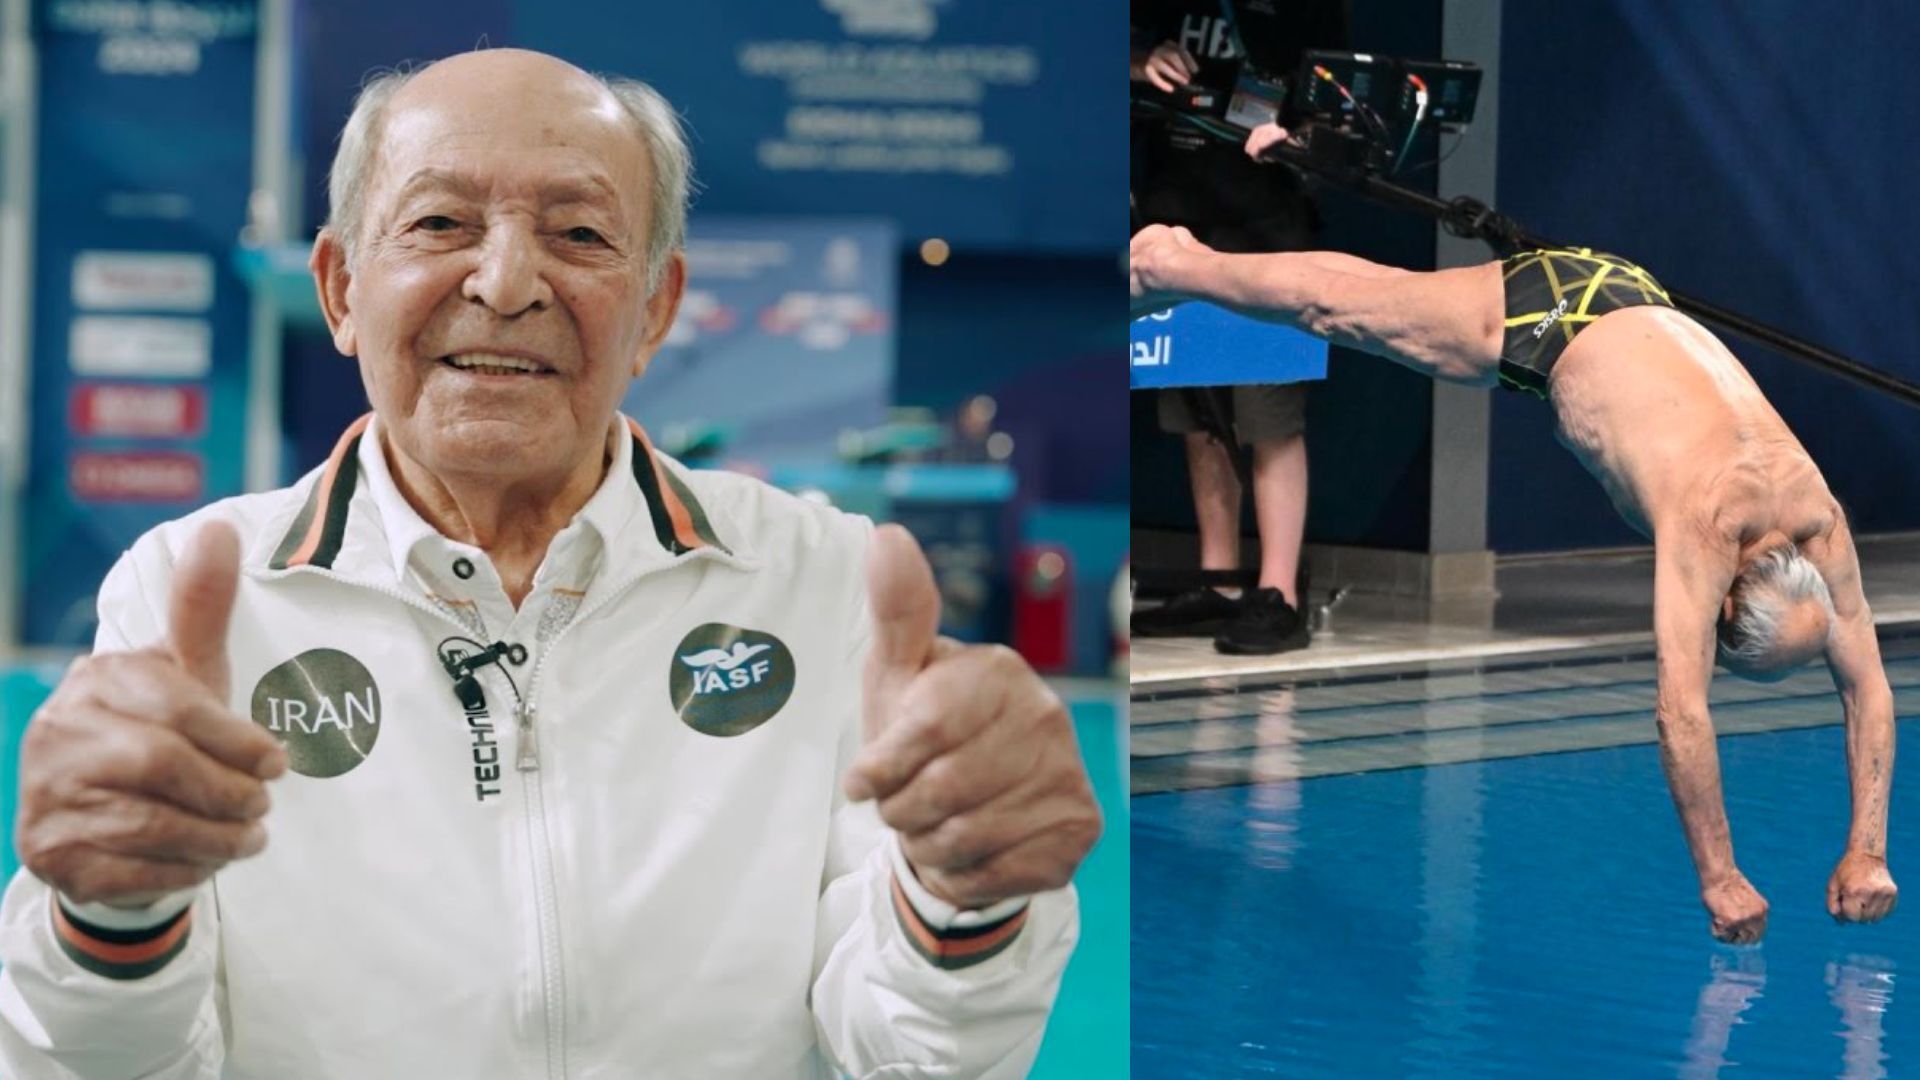 Age is just a number for this 100-year-old diver